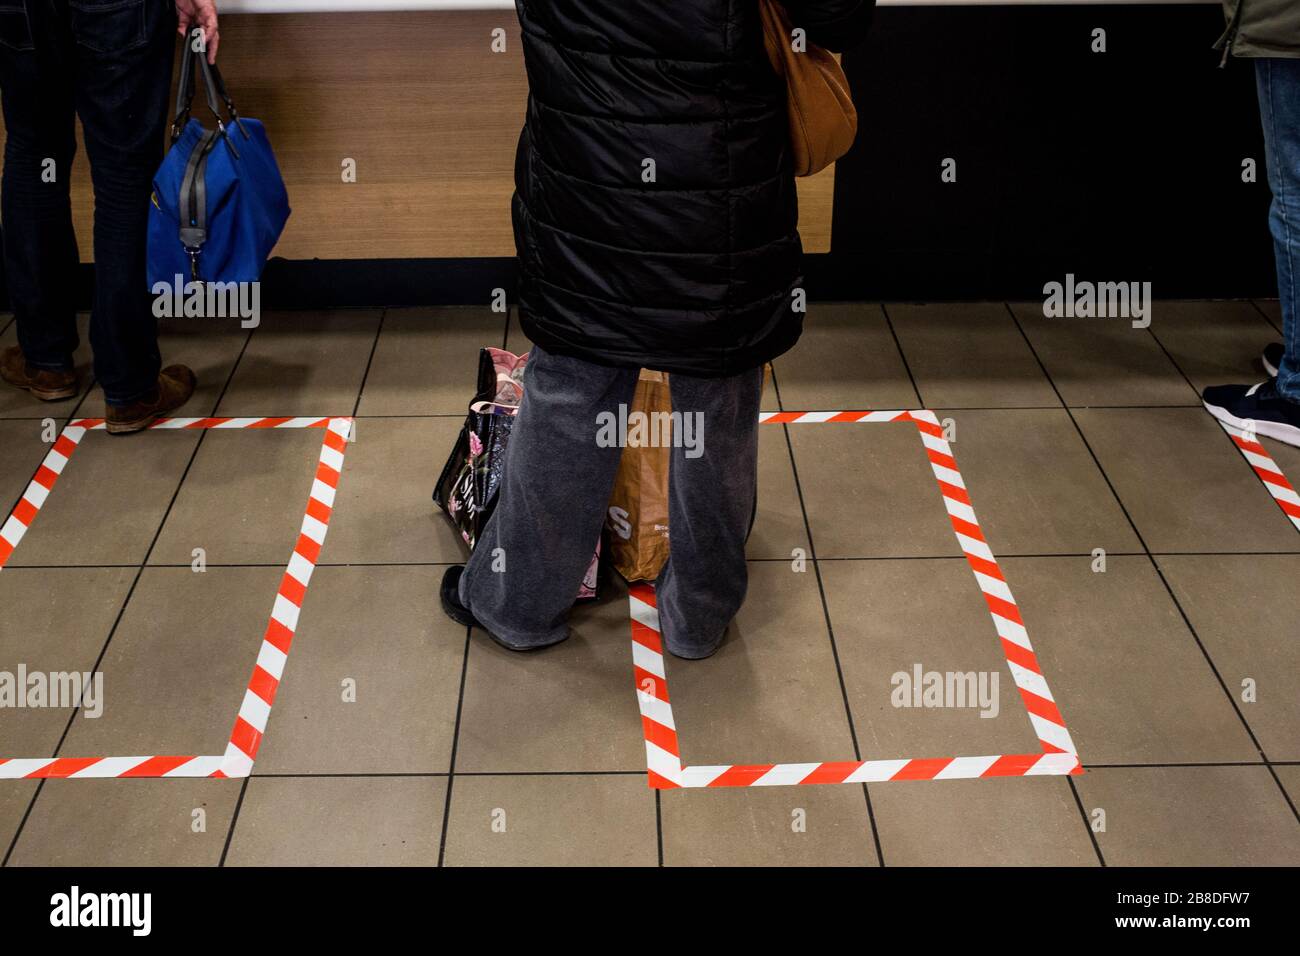 London, UK.  McDonald's store uses tape to mark where customers should stand for social distancing. Credit: Thabo Jaiyesimi/Alamy Live News Stock Photo